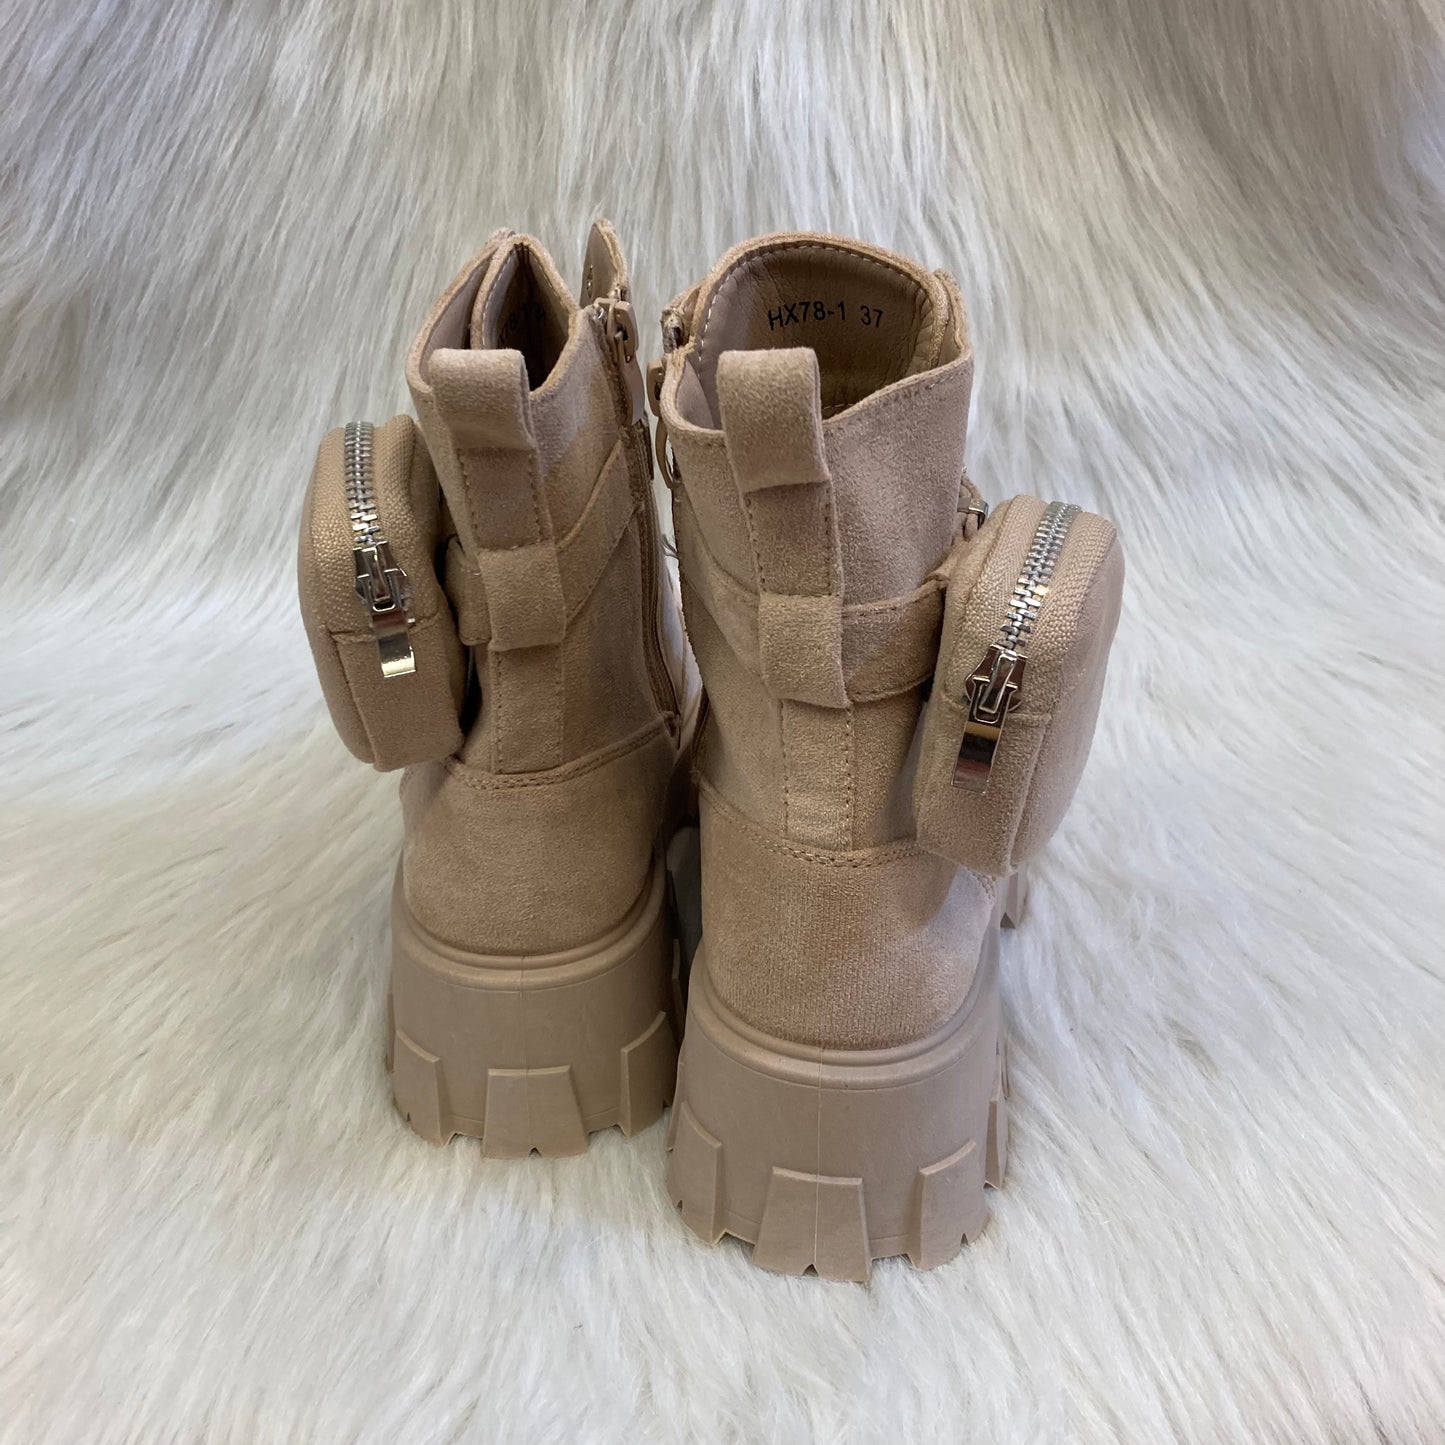 Beige suede ankle boot with pocket